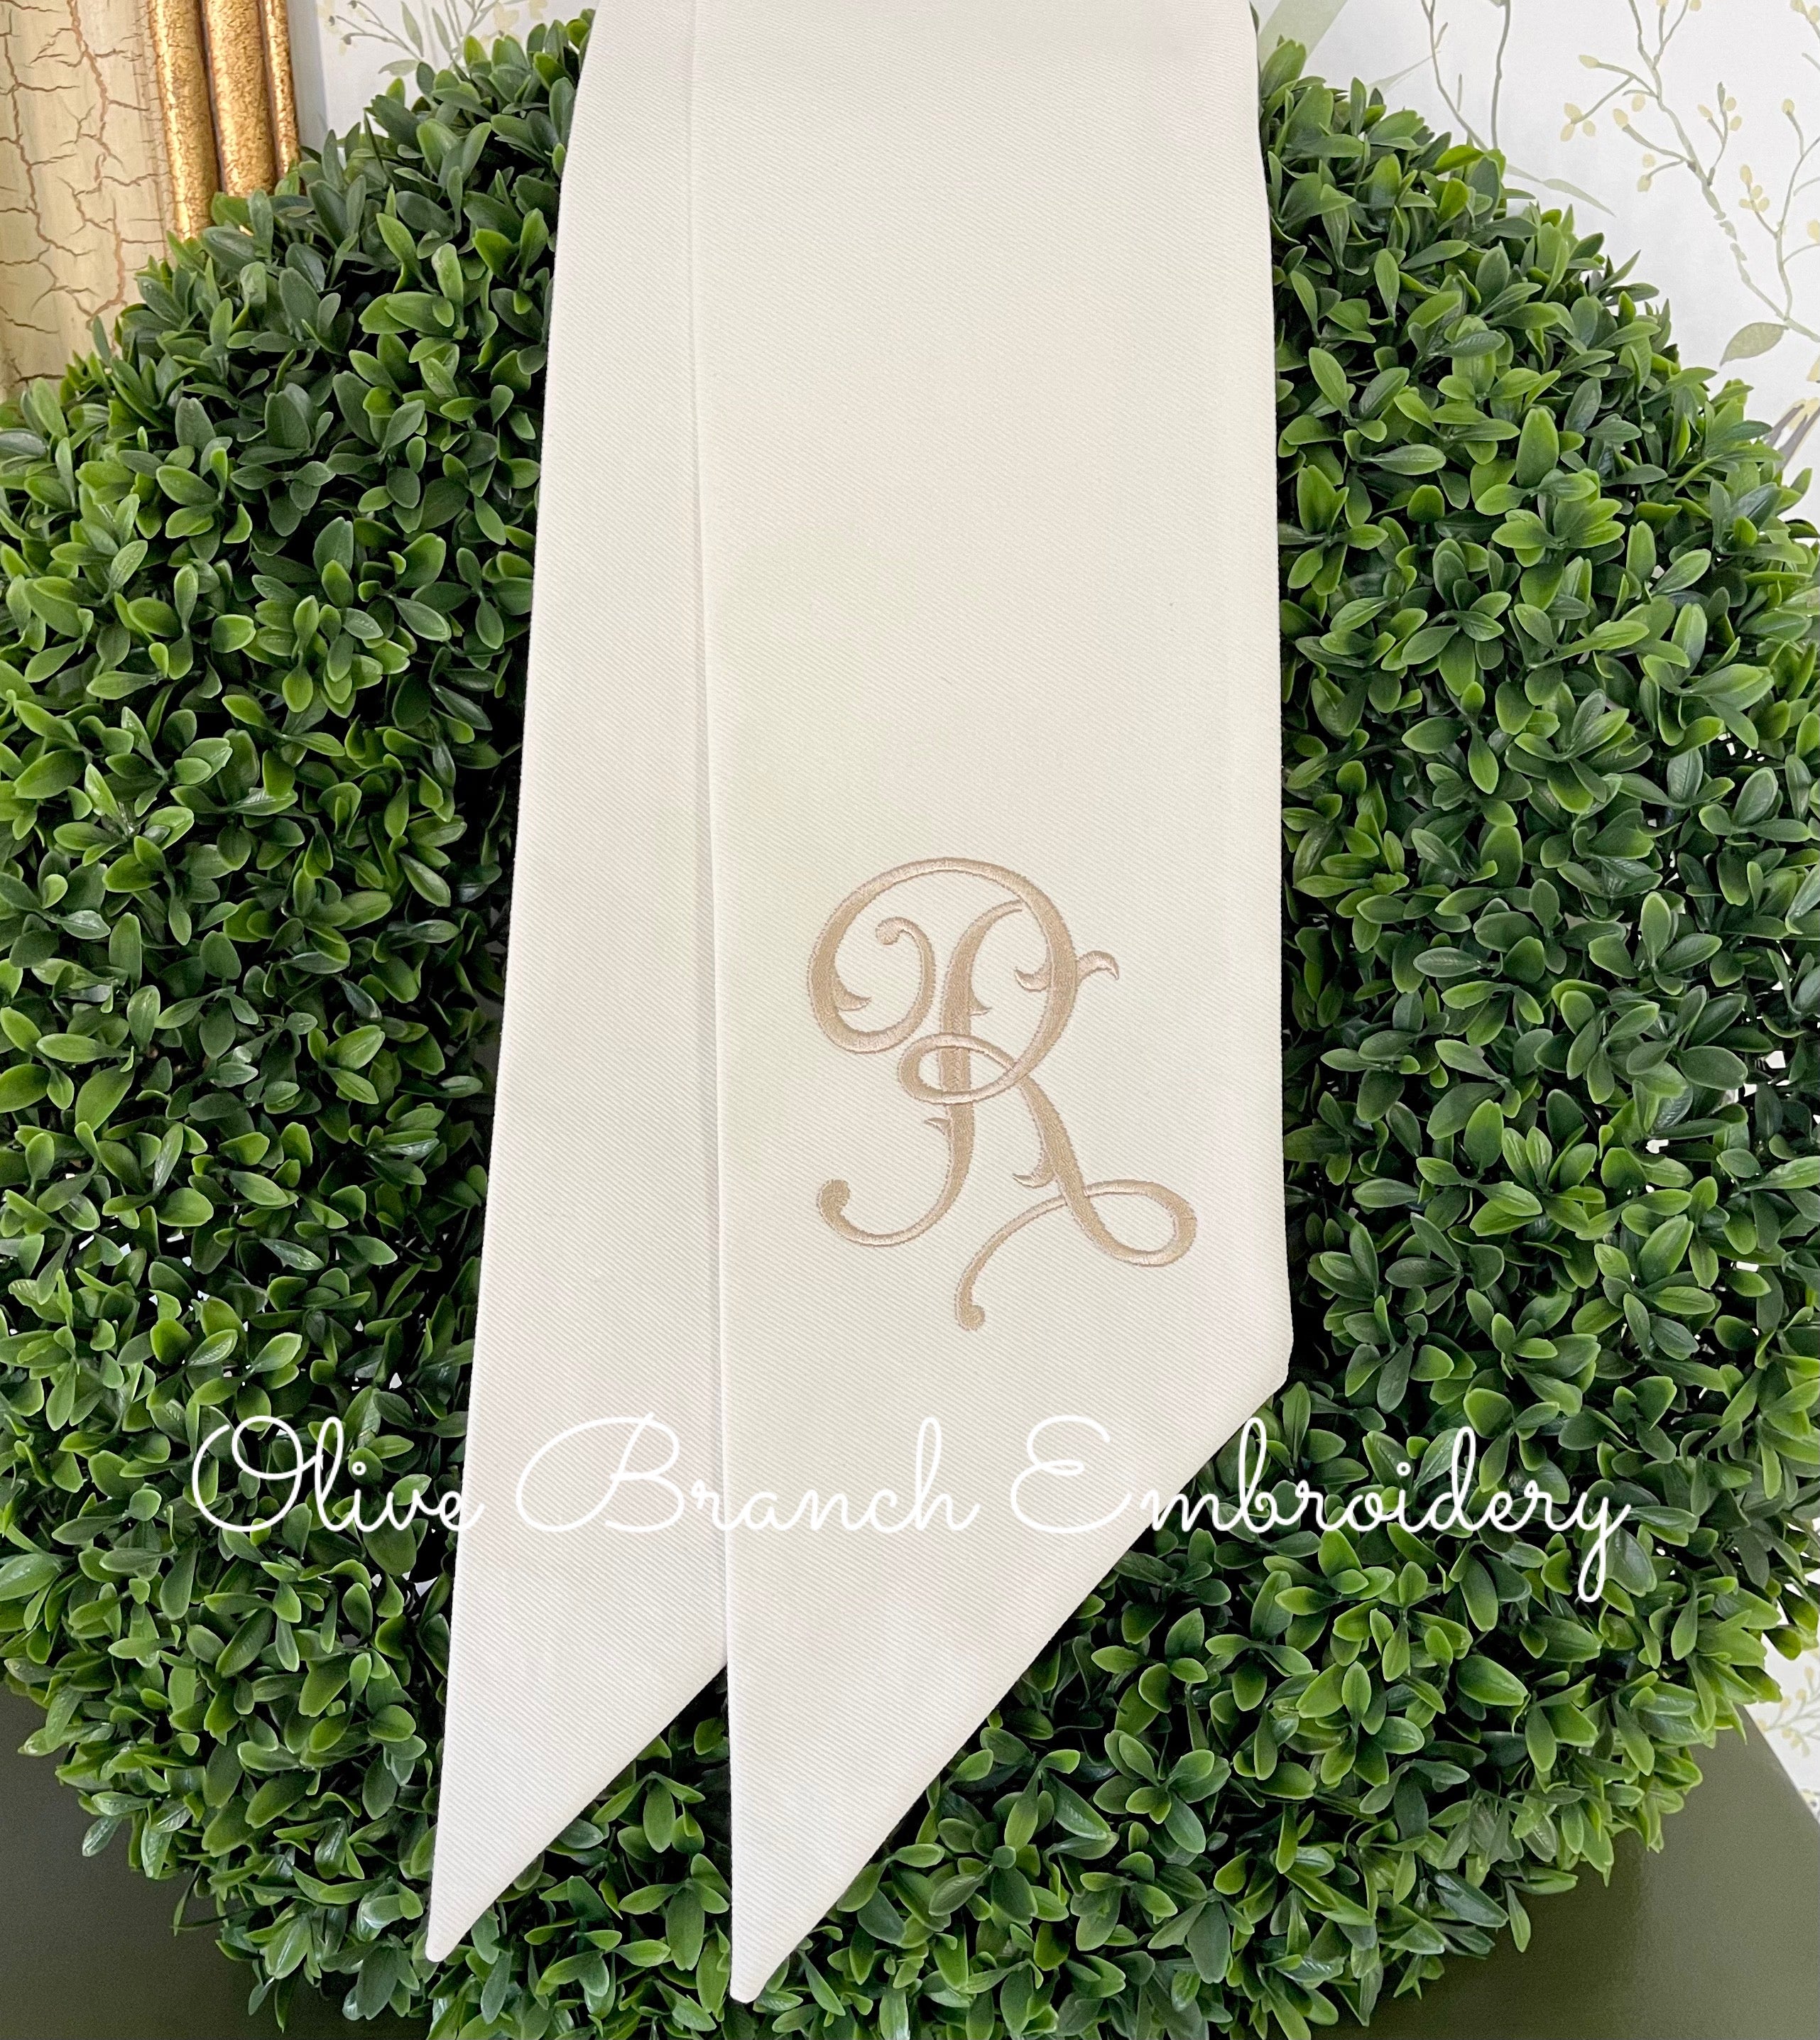 Wreath Sash for Front Door Decor - Blank White Wreath Sash for Embroidery  Monogram - Wreath Accessories - Polyester - 4.5 W x 56 L